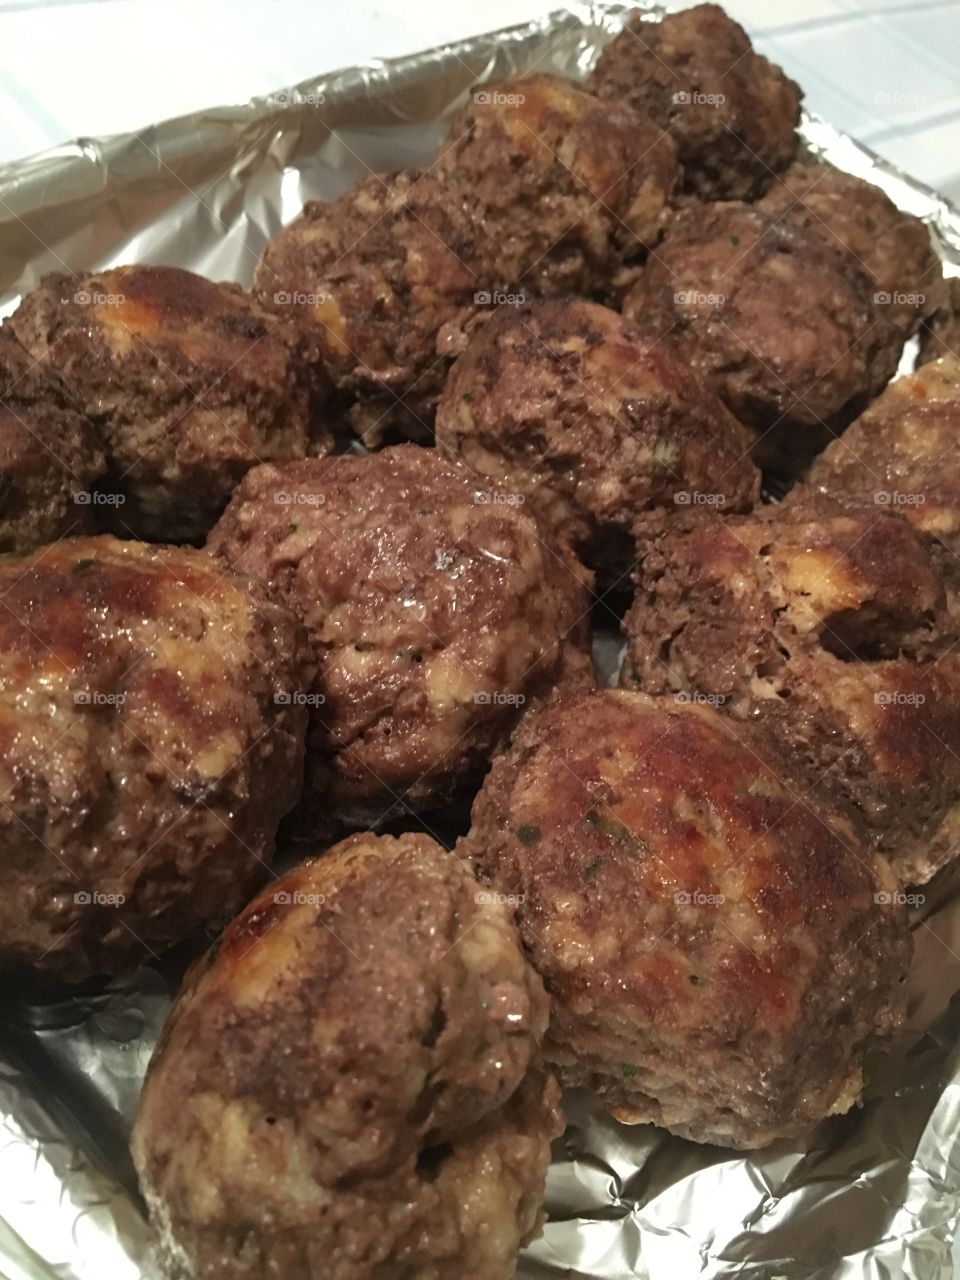 Meatball after